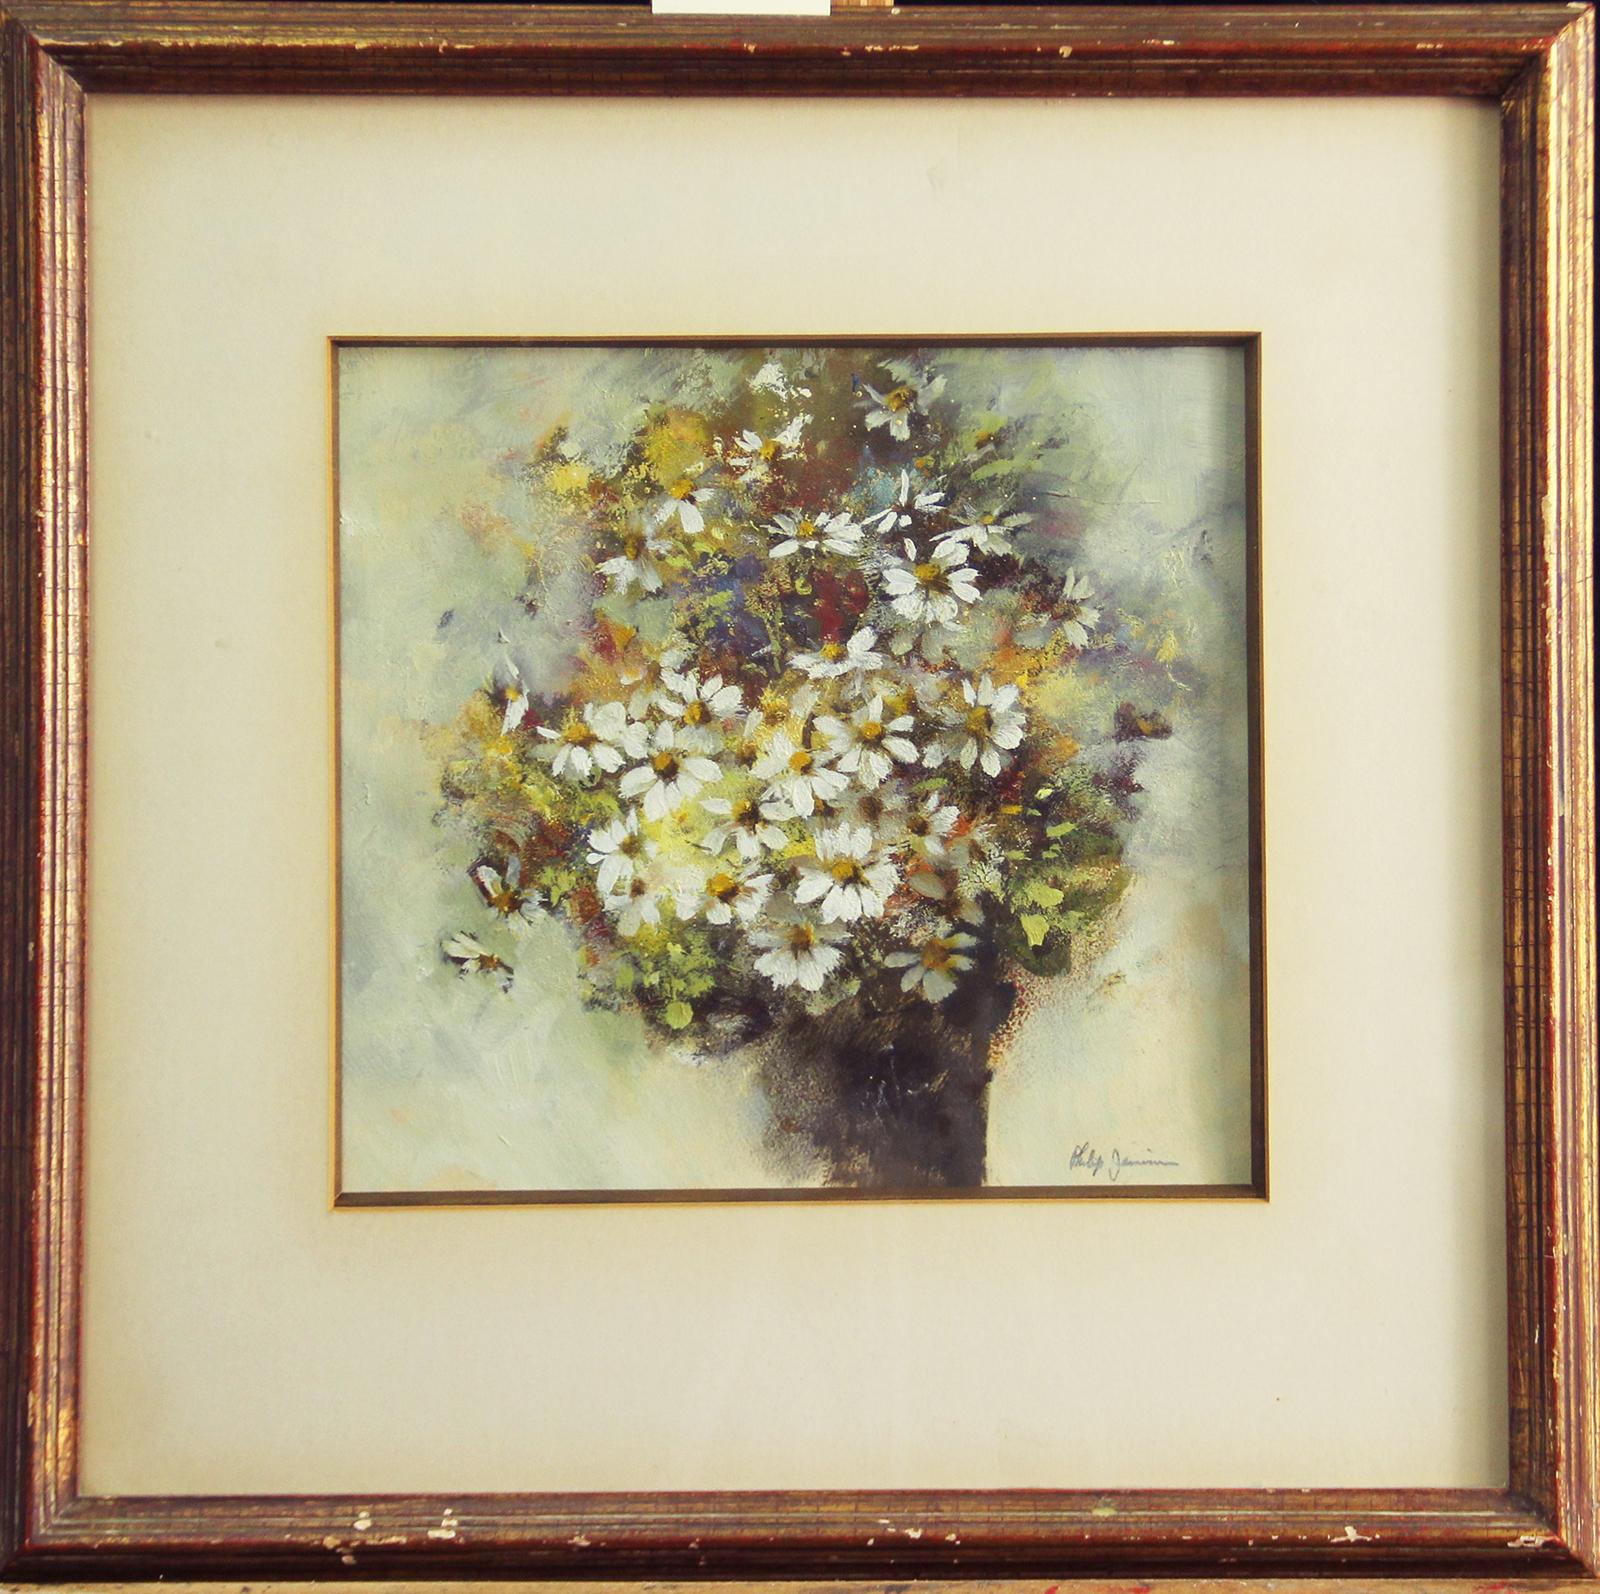 "Floral Still Life" by Phillip Duane Jamison is a 10 1/2" x 9 1/2" watercolor on paper painting. It is matted and framed, signed "Phillip Jamison" in the lower right. The painting comes from a private collection in West Chester, Pennsylvania and is